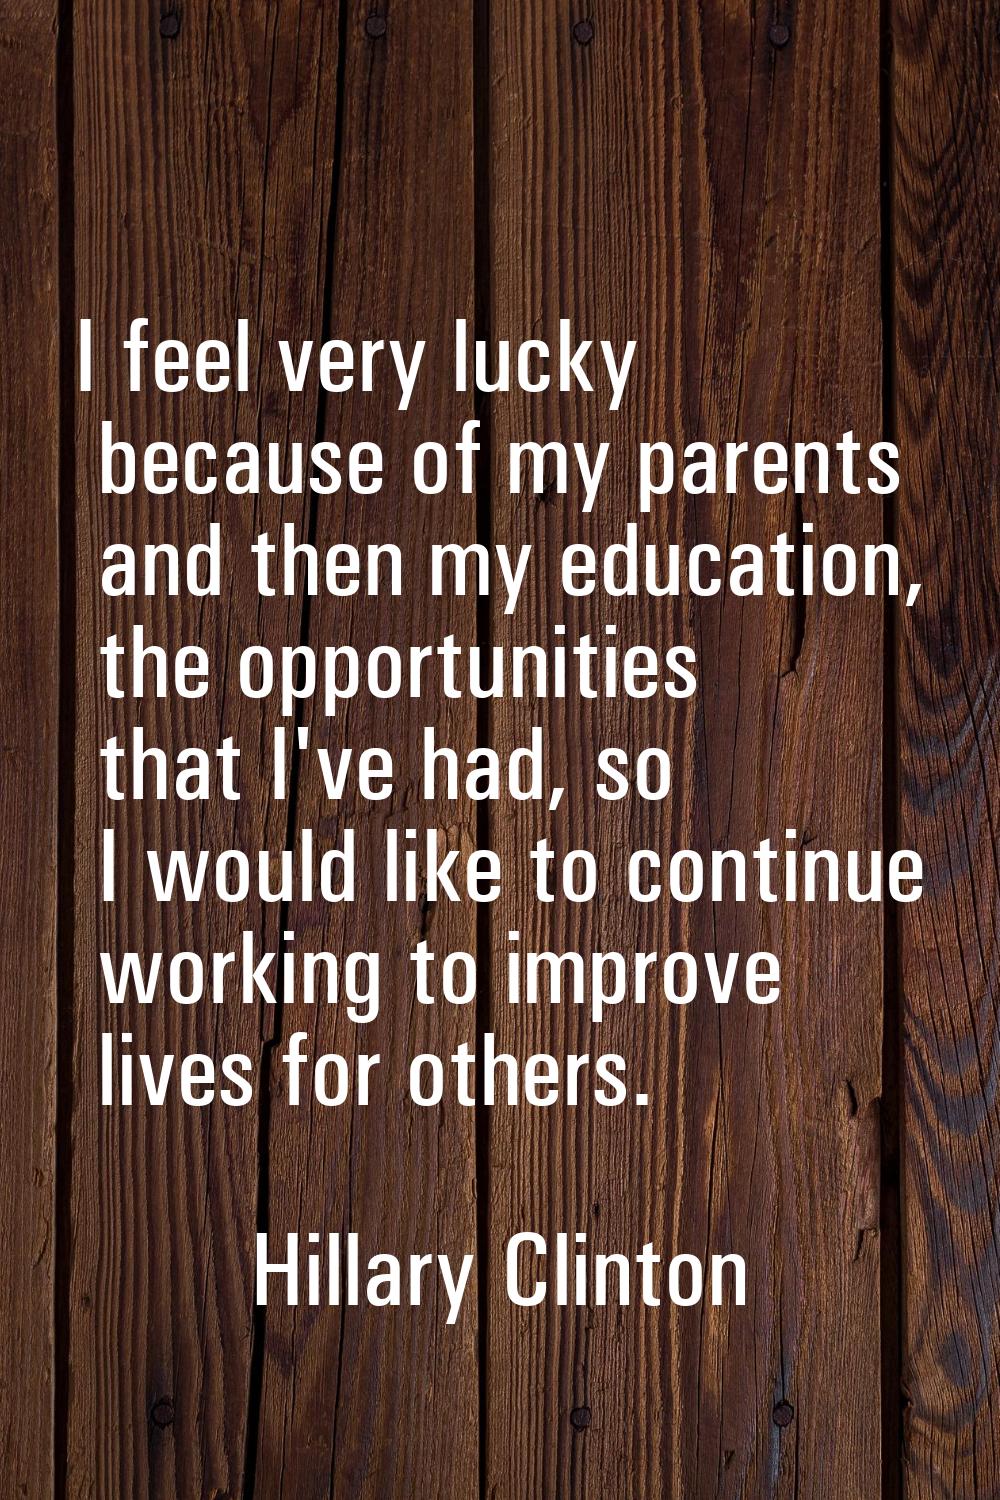 I feel very lucky because of my parents and then my education, the opportunities that I've had, so 